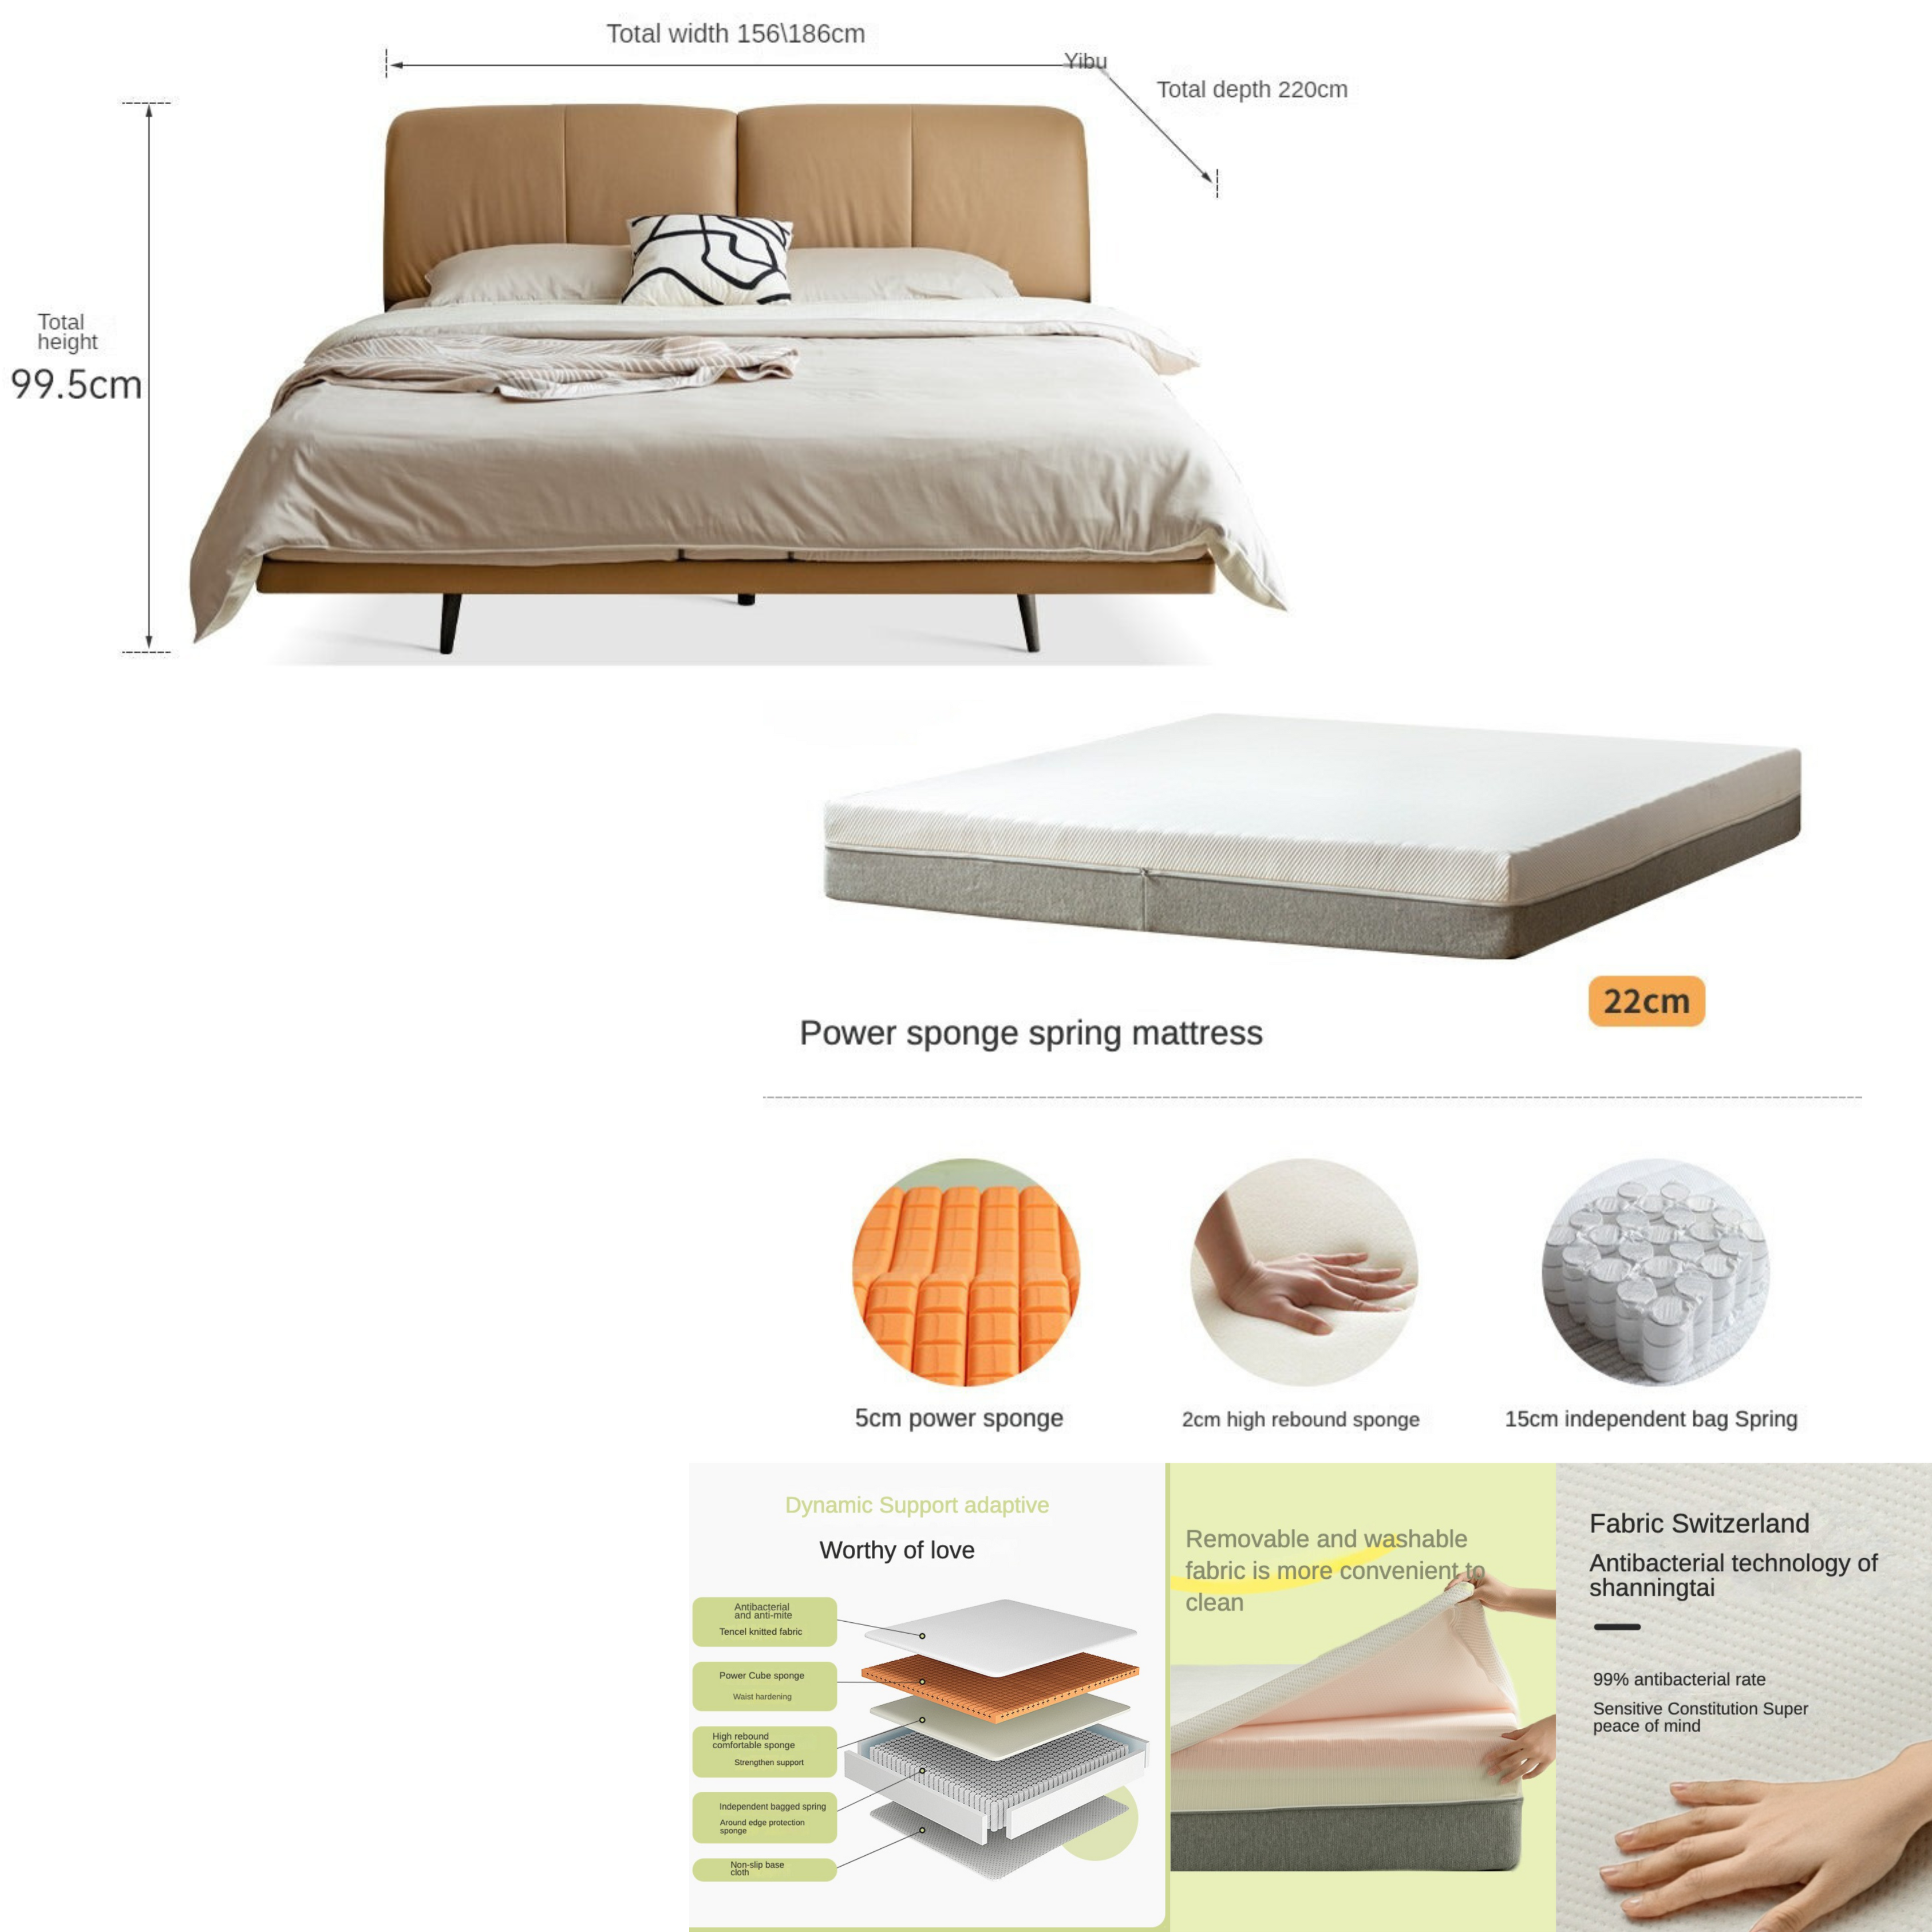 Technology Cloth Soft Light Suspension Bed _)